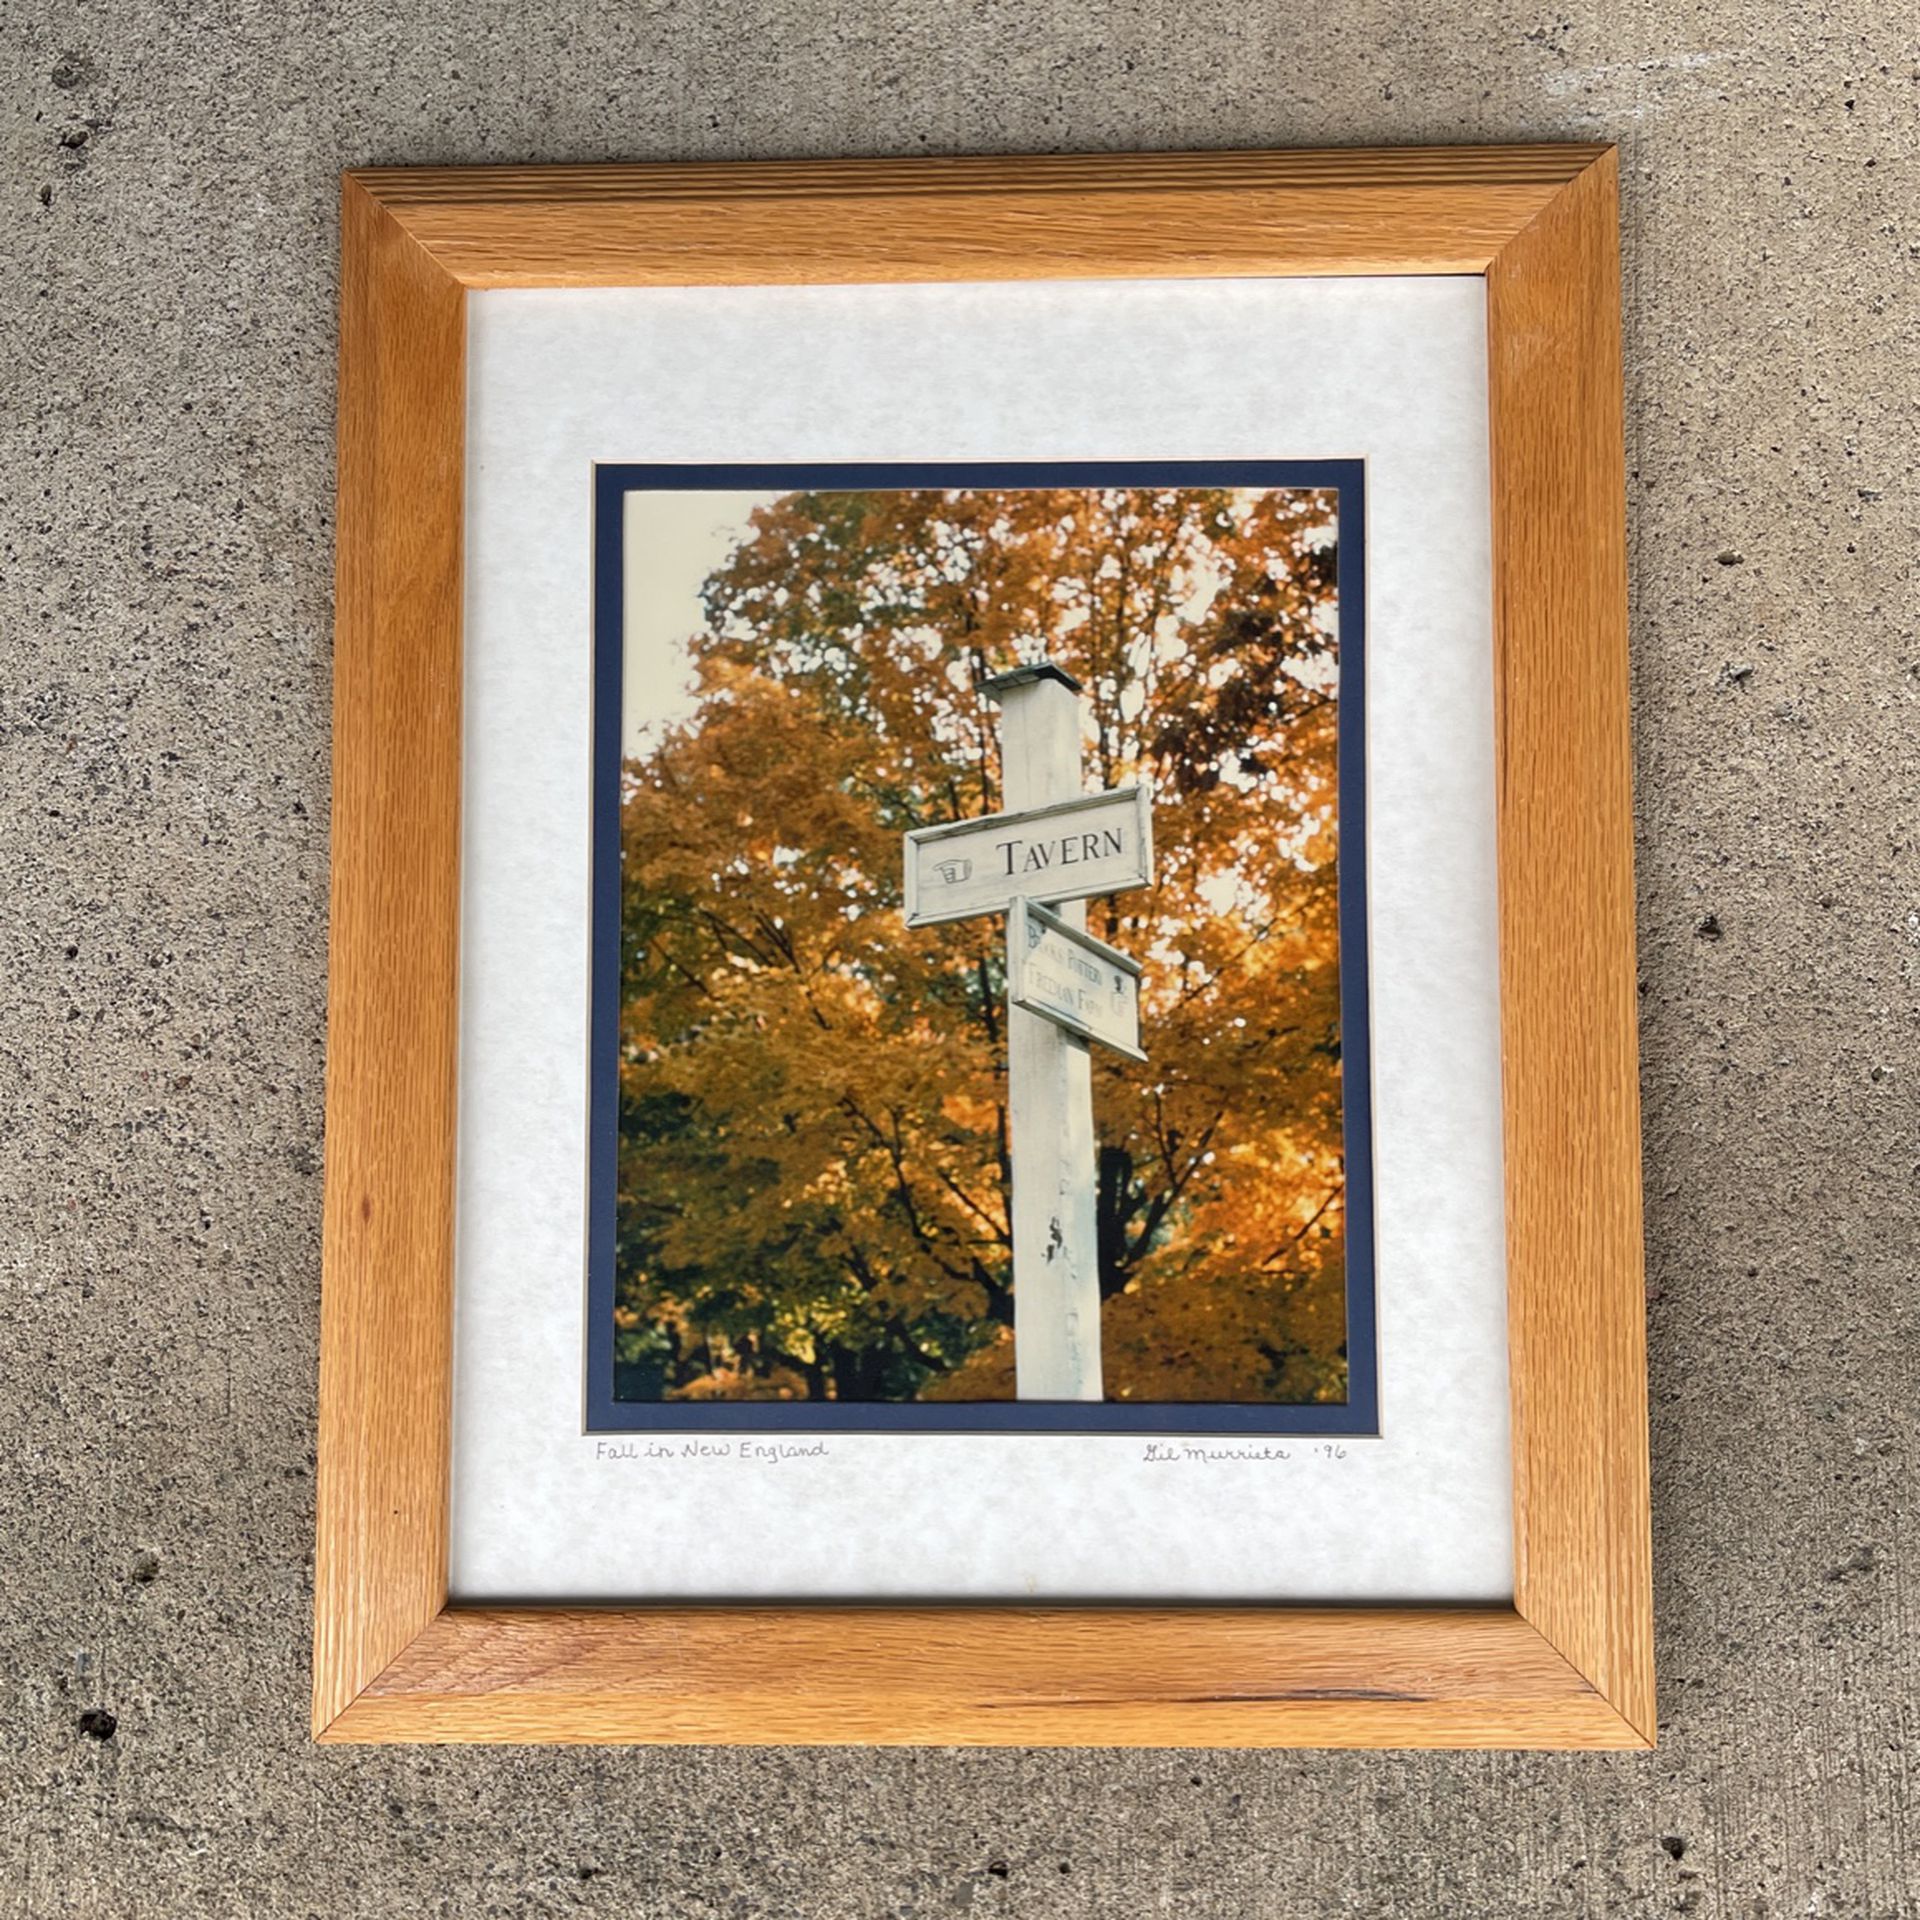 Framed fall in New England Tavern sign 13 1/“ x 16 1/2”